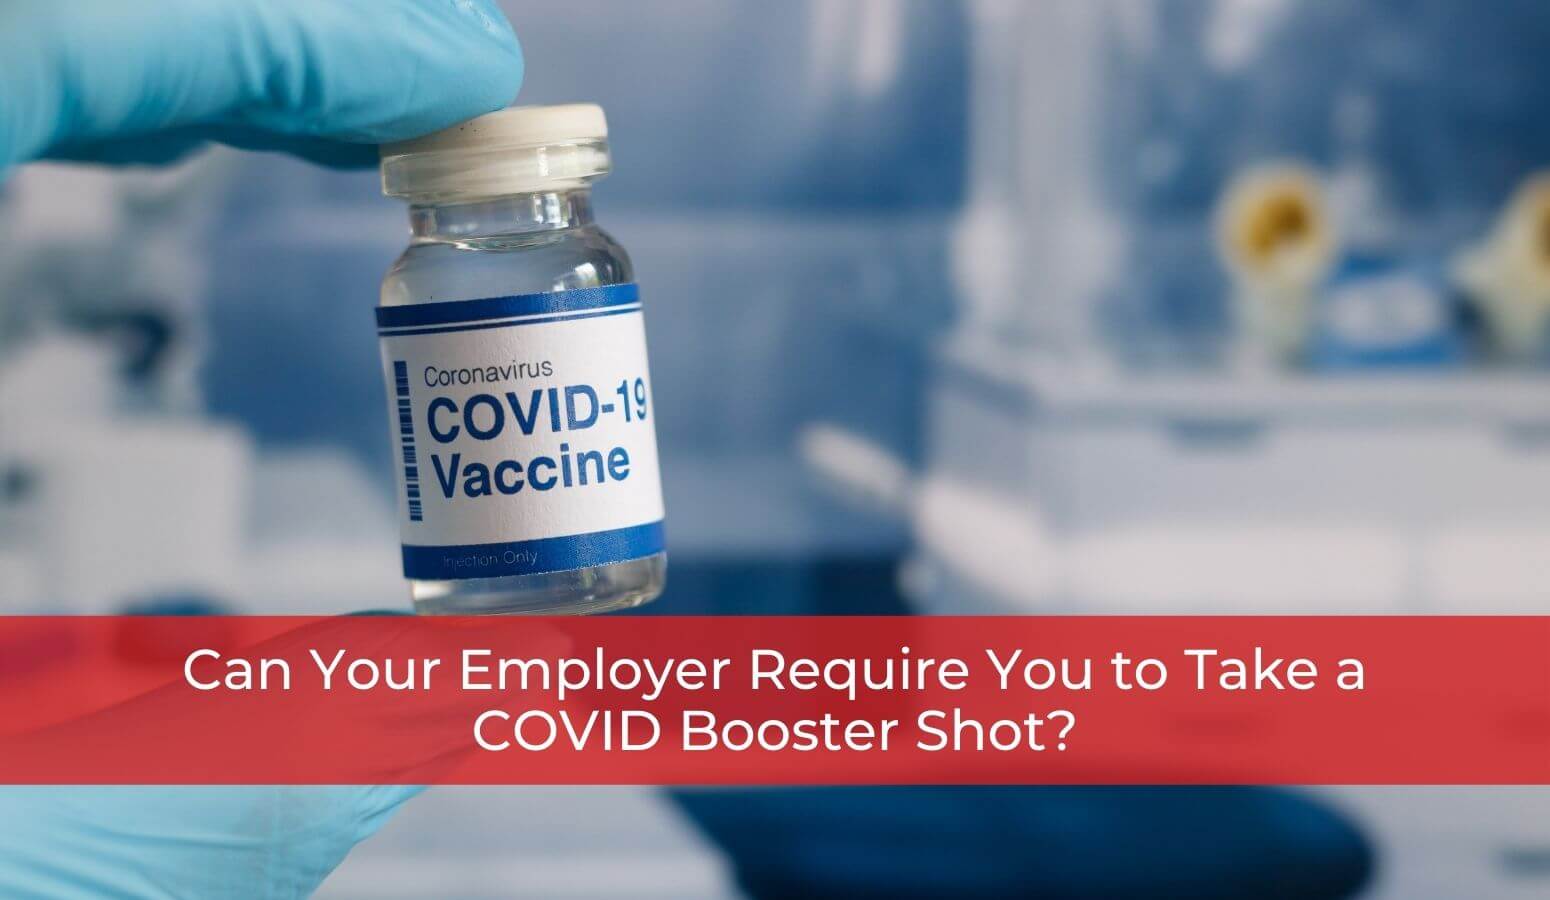 Can My Employer Require Me to Take a COVID Booster Shot - Feb 8 - Whitten & Lublin Employment Lawyers - Toronto Employment Lawyers - Ontario Laws - Severance Package